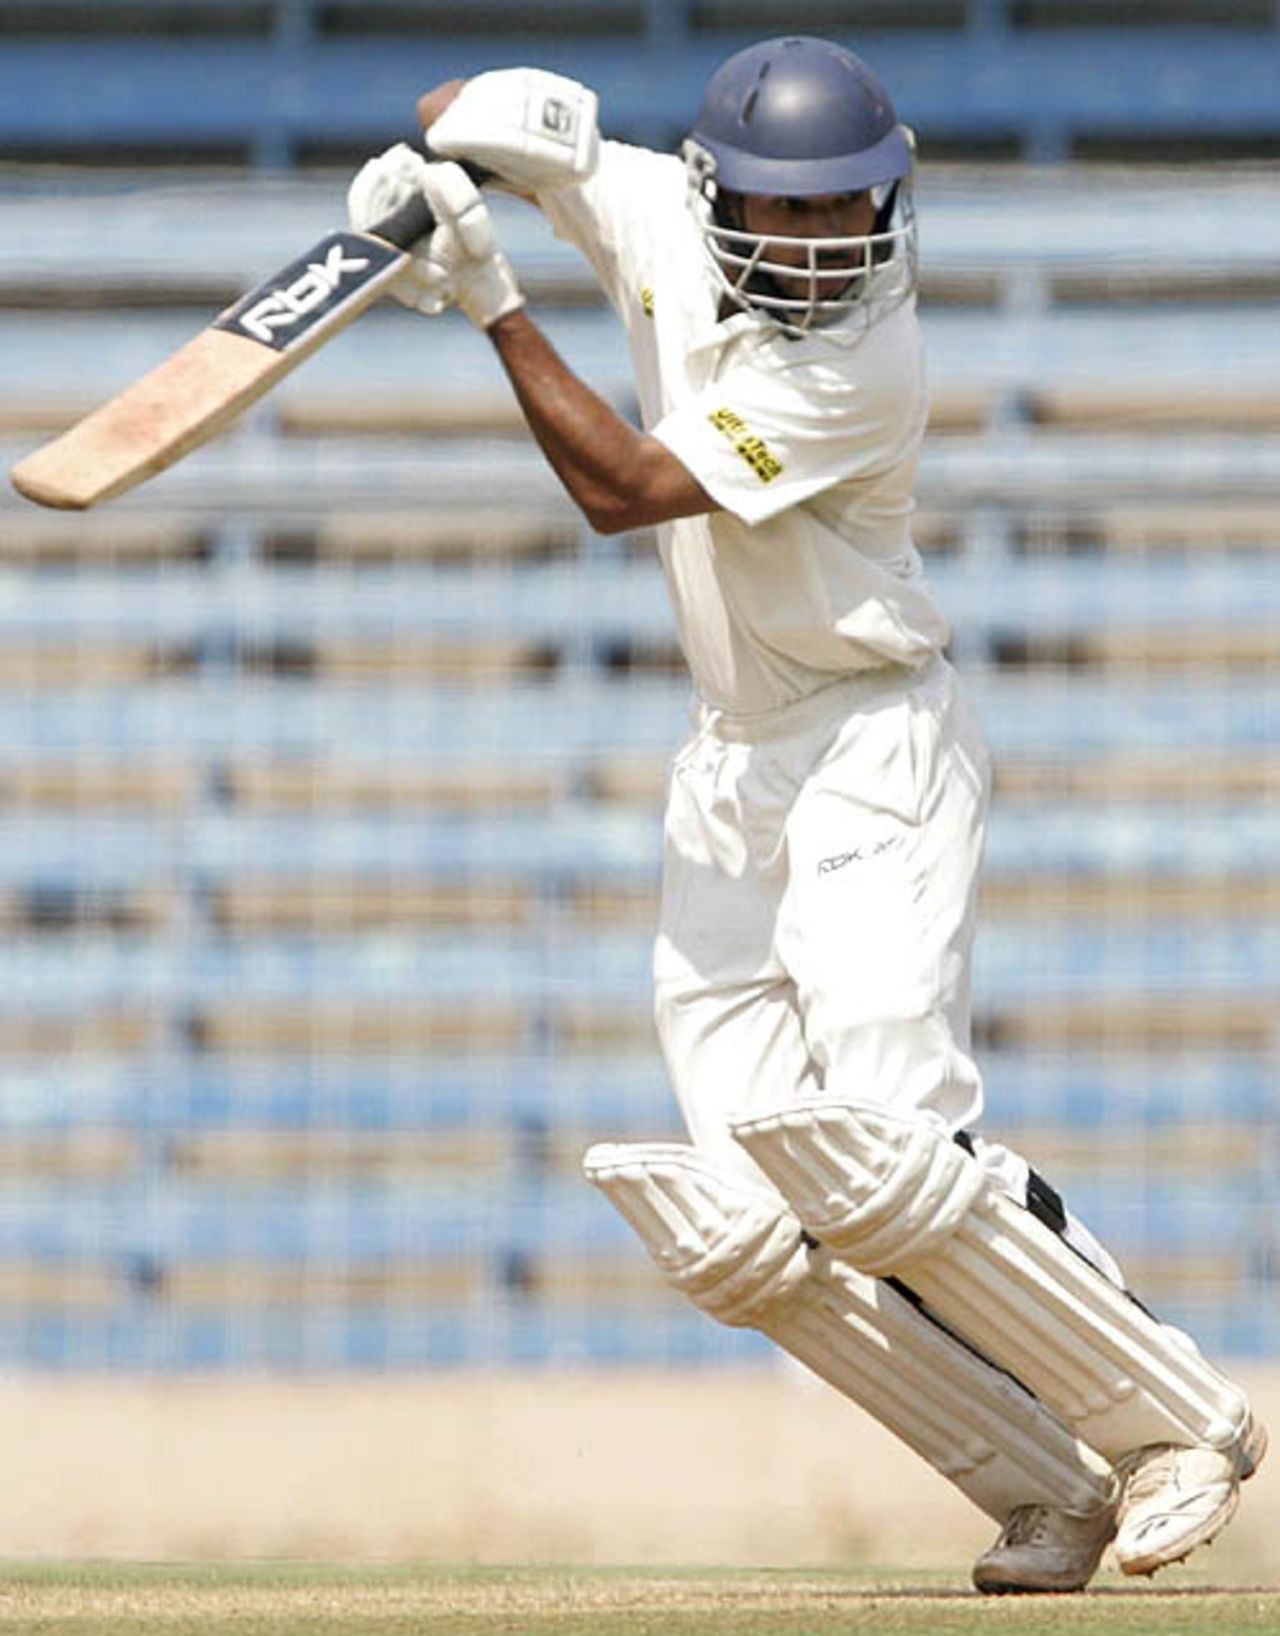 Shikhar Dhawan guides the ball through the off side, North Zone v West Zone, Duleep Trophy final, 4th day, Mumbai, February 22, 2008